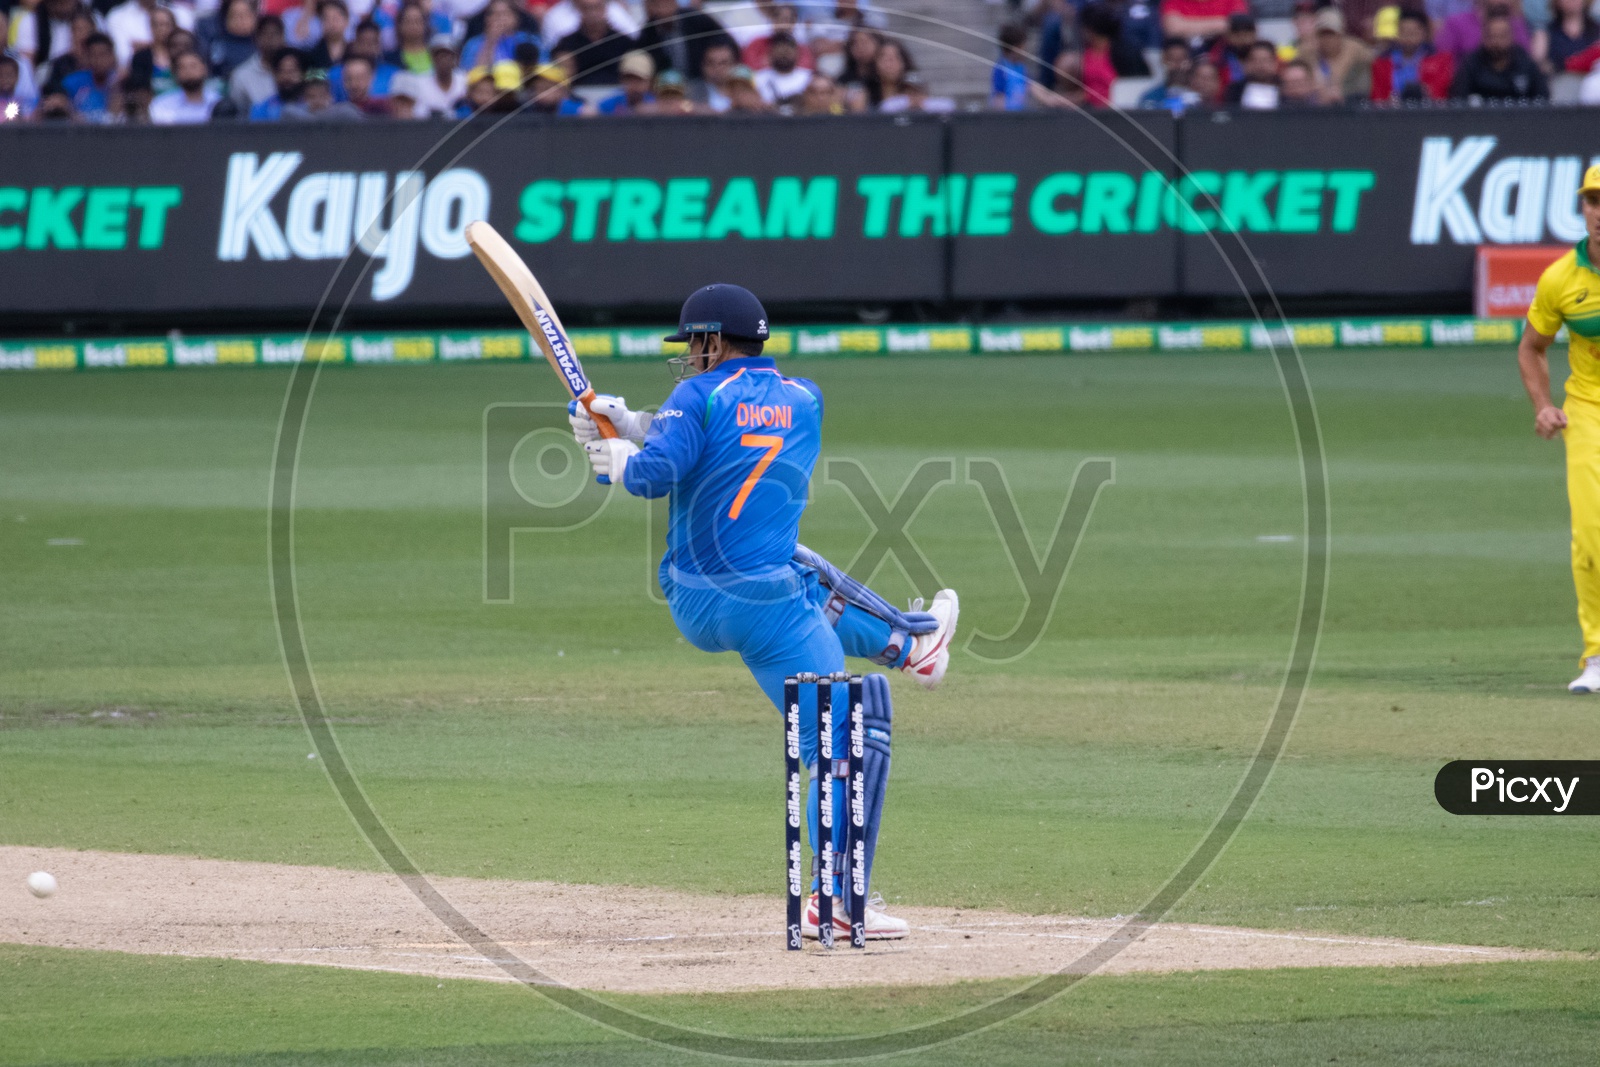 MS Dhoni on a Cricket Stadium Playing a Shot In a Match